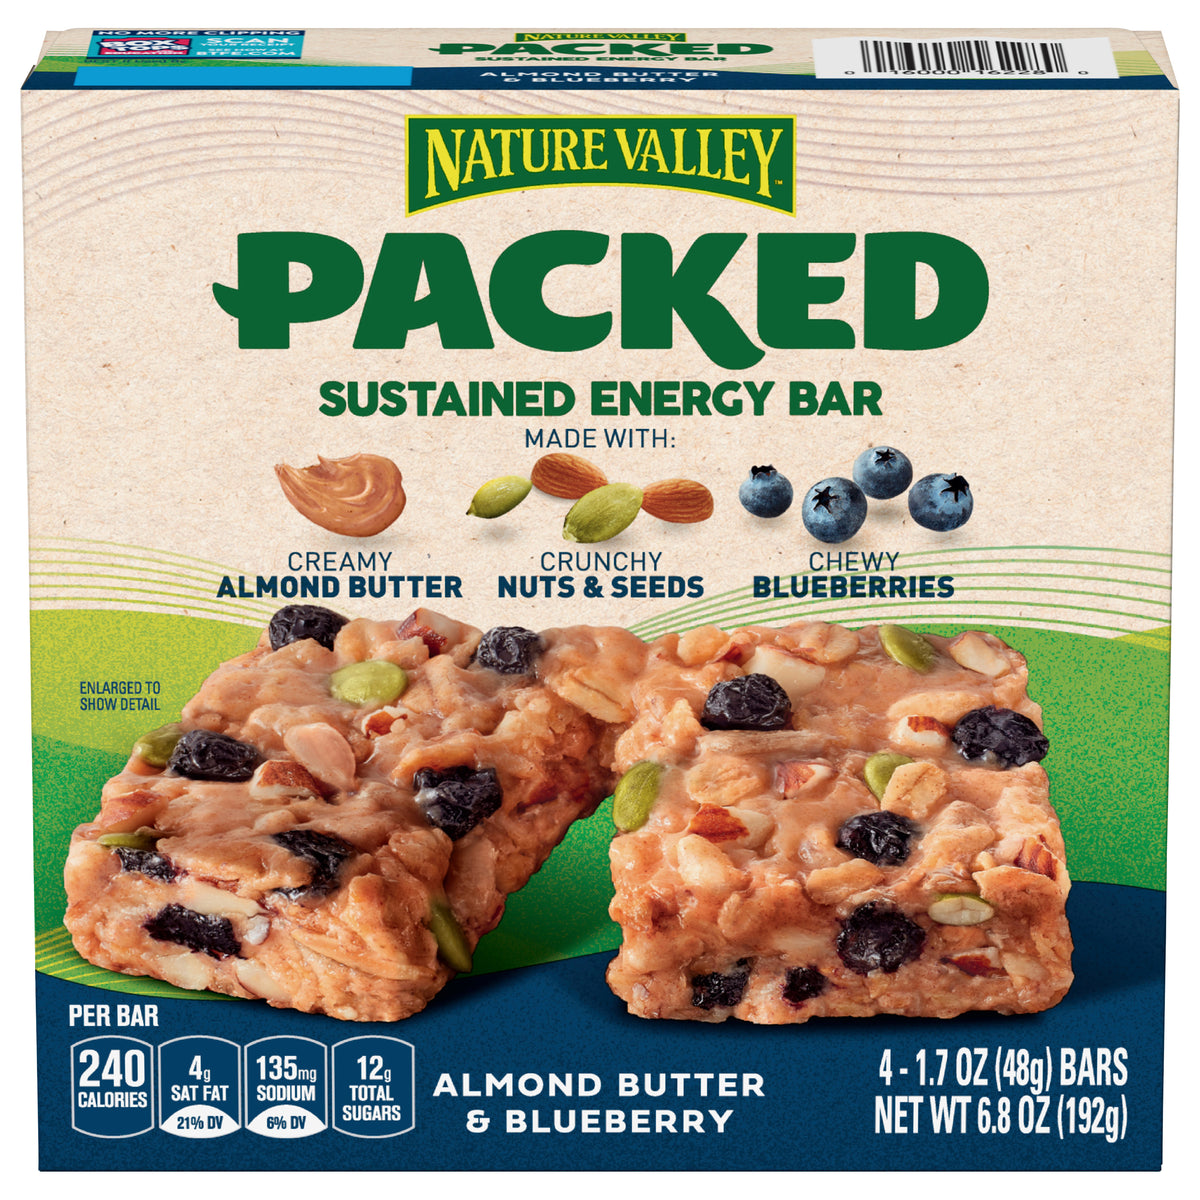 Nature Valley adds new level of flavor with first savory snack